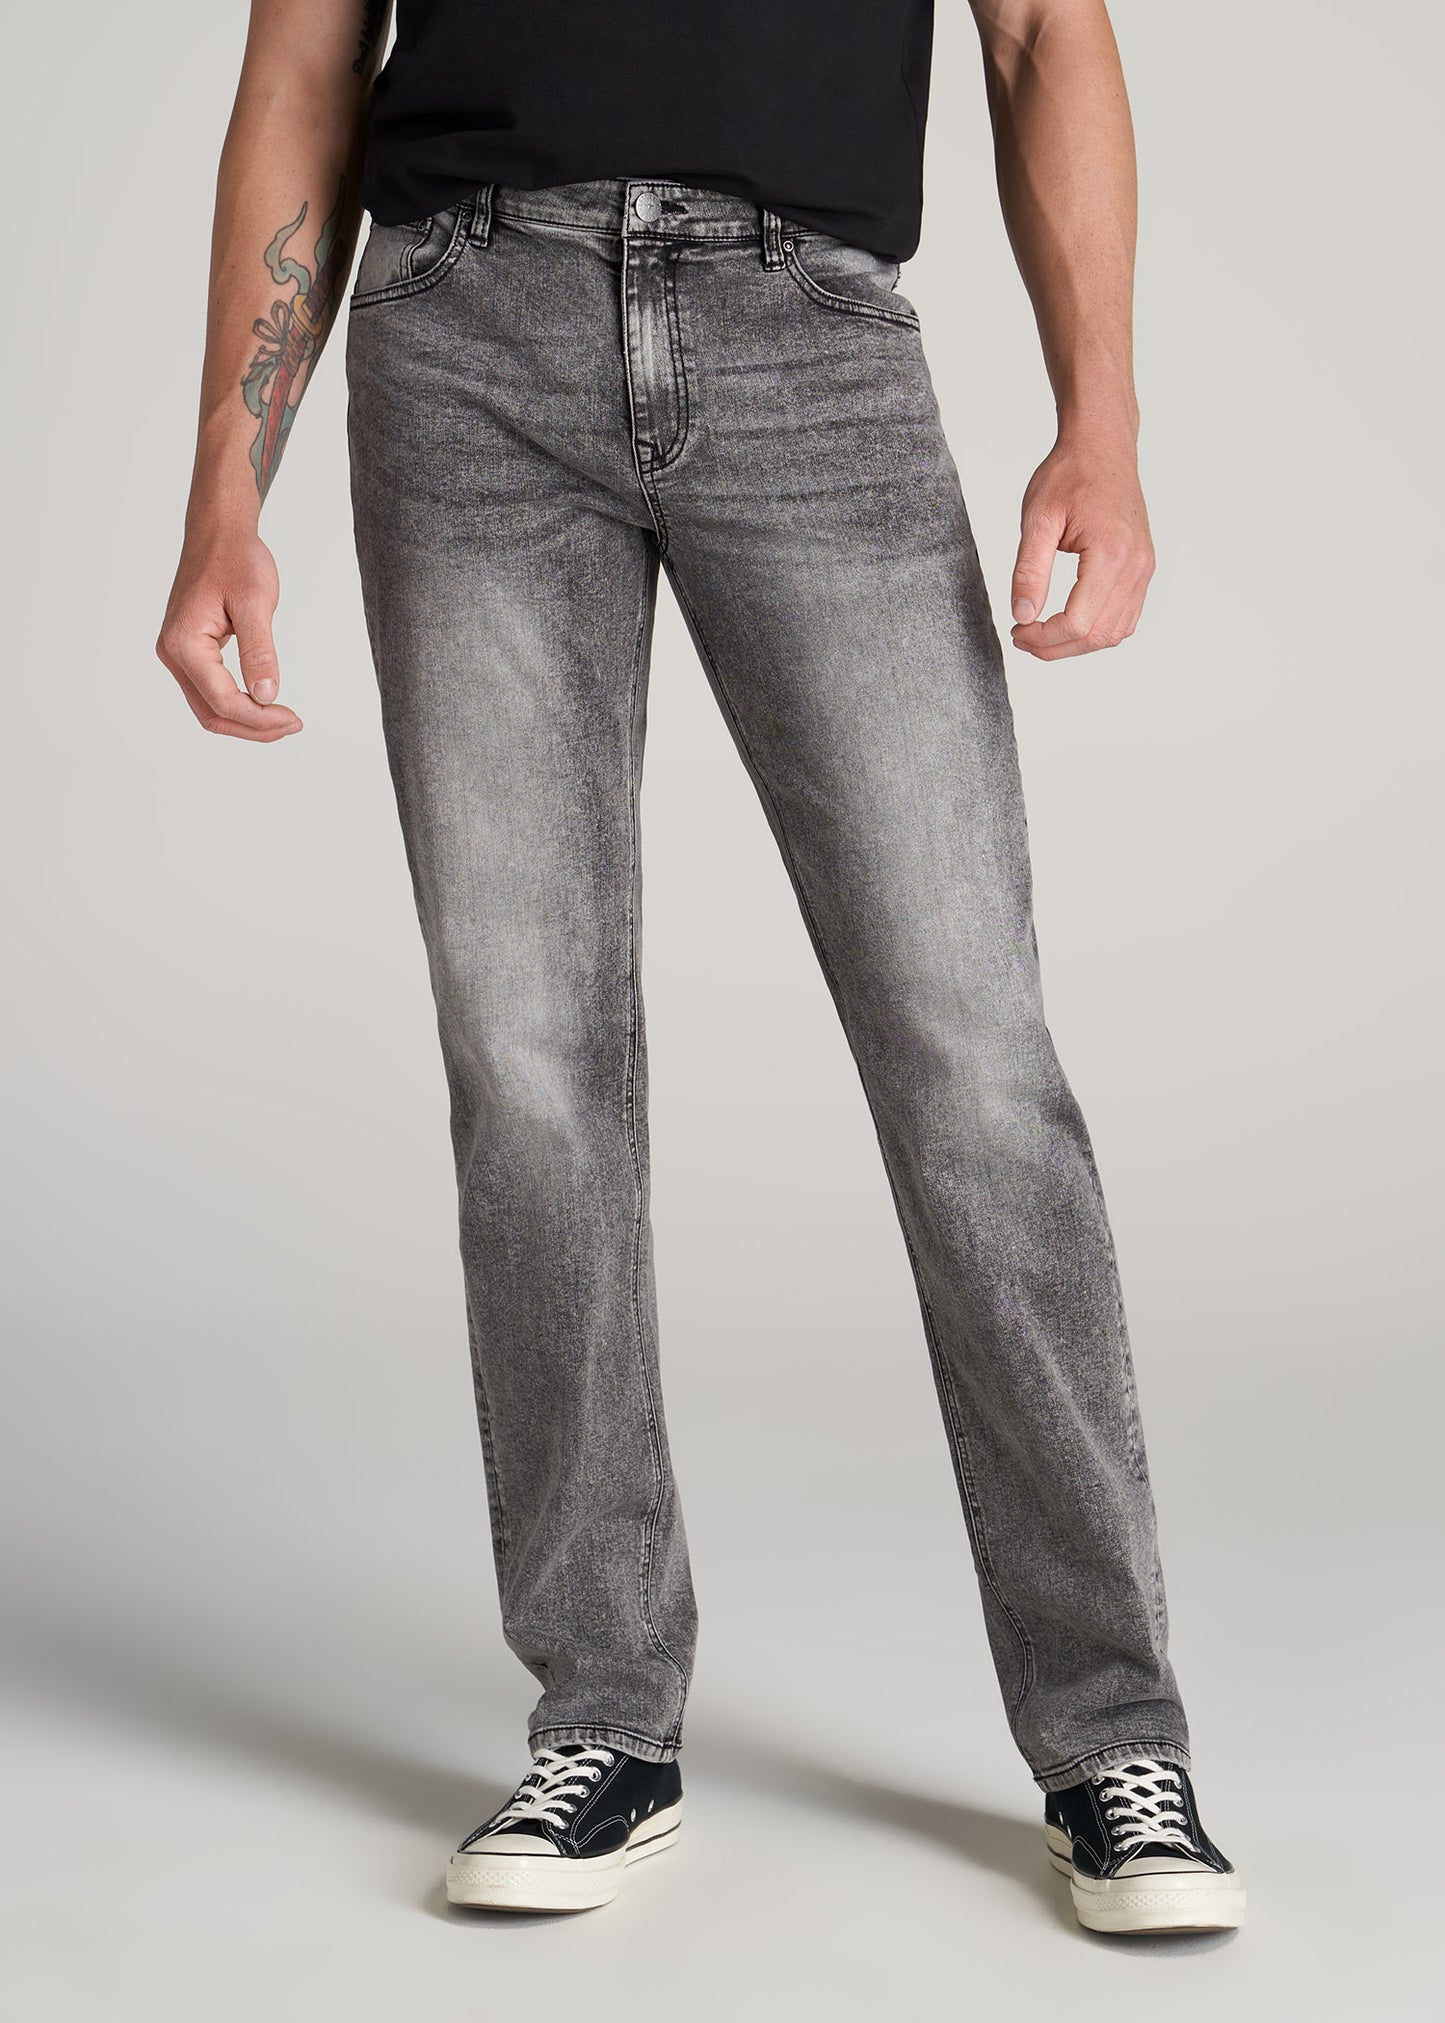 Tall guy wearing American Tall's J1 Straight-Leg Jeans in the color Washed Faded Black.